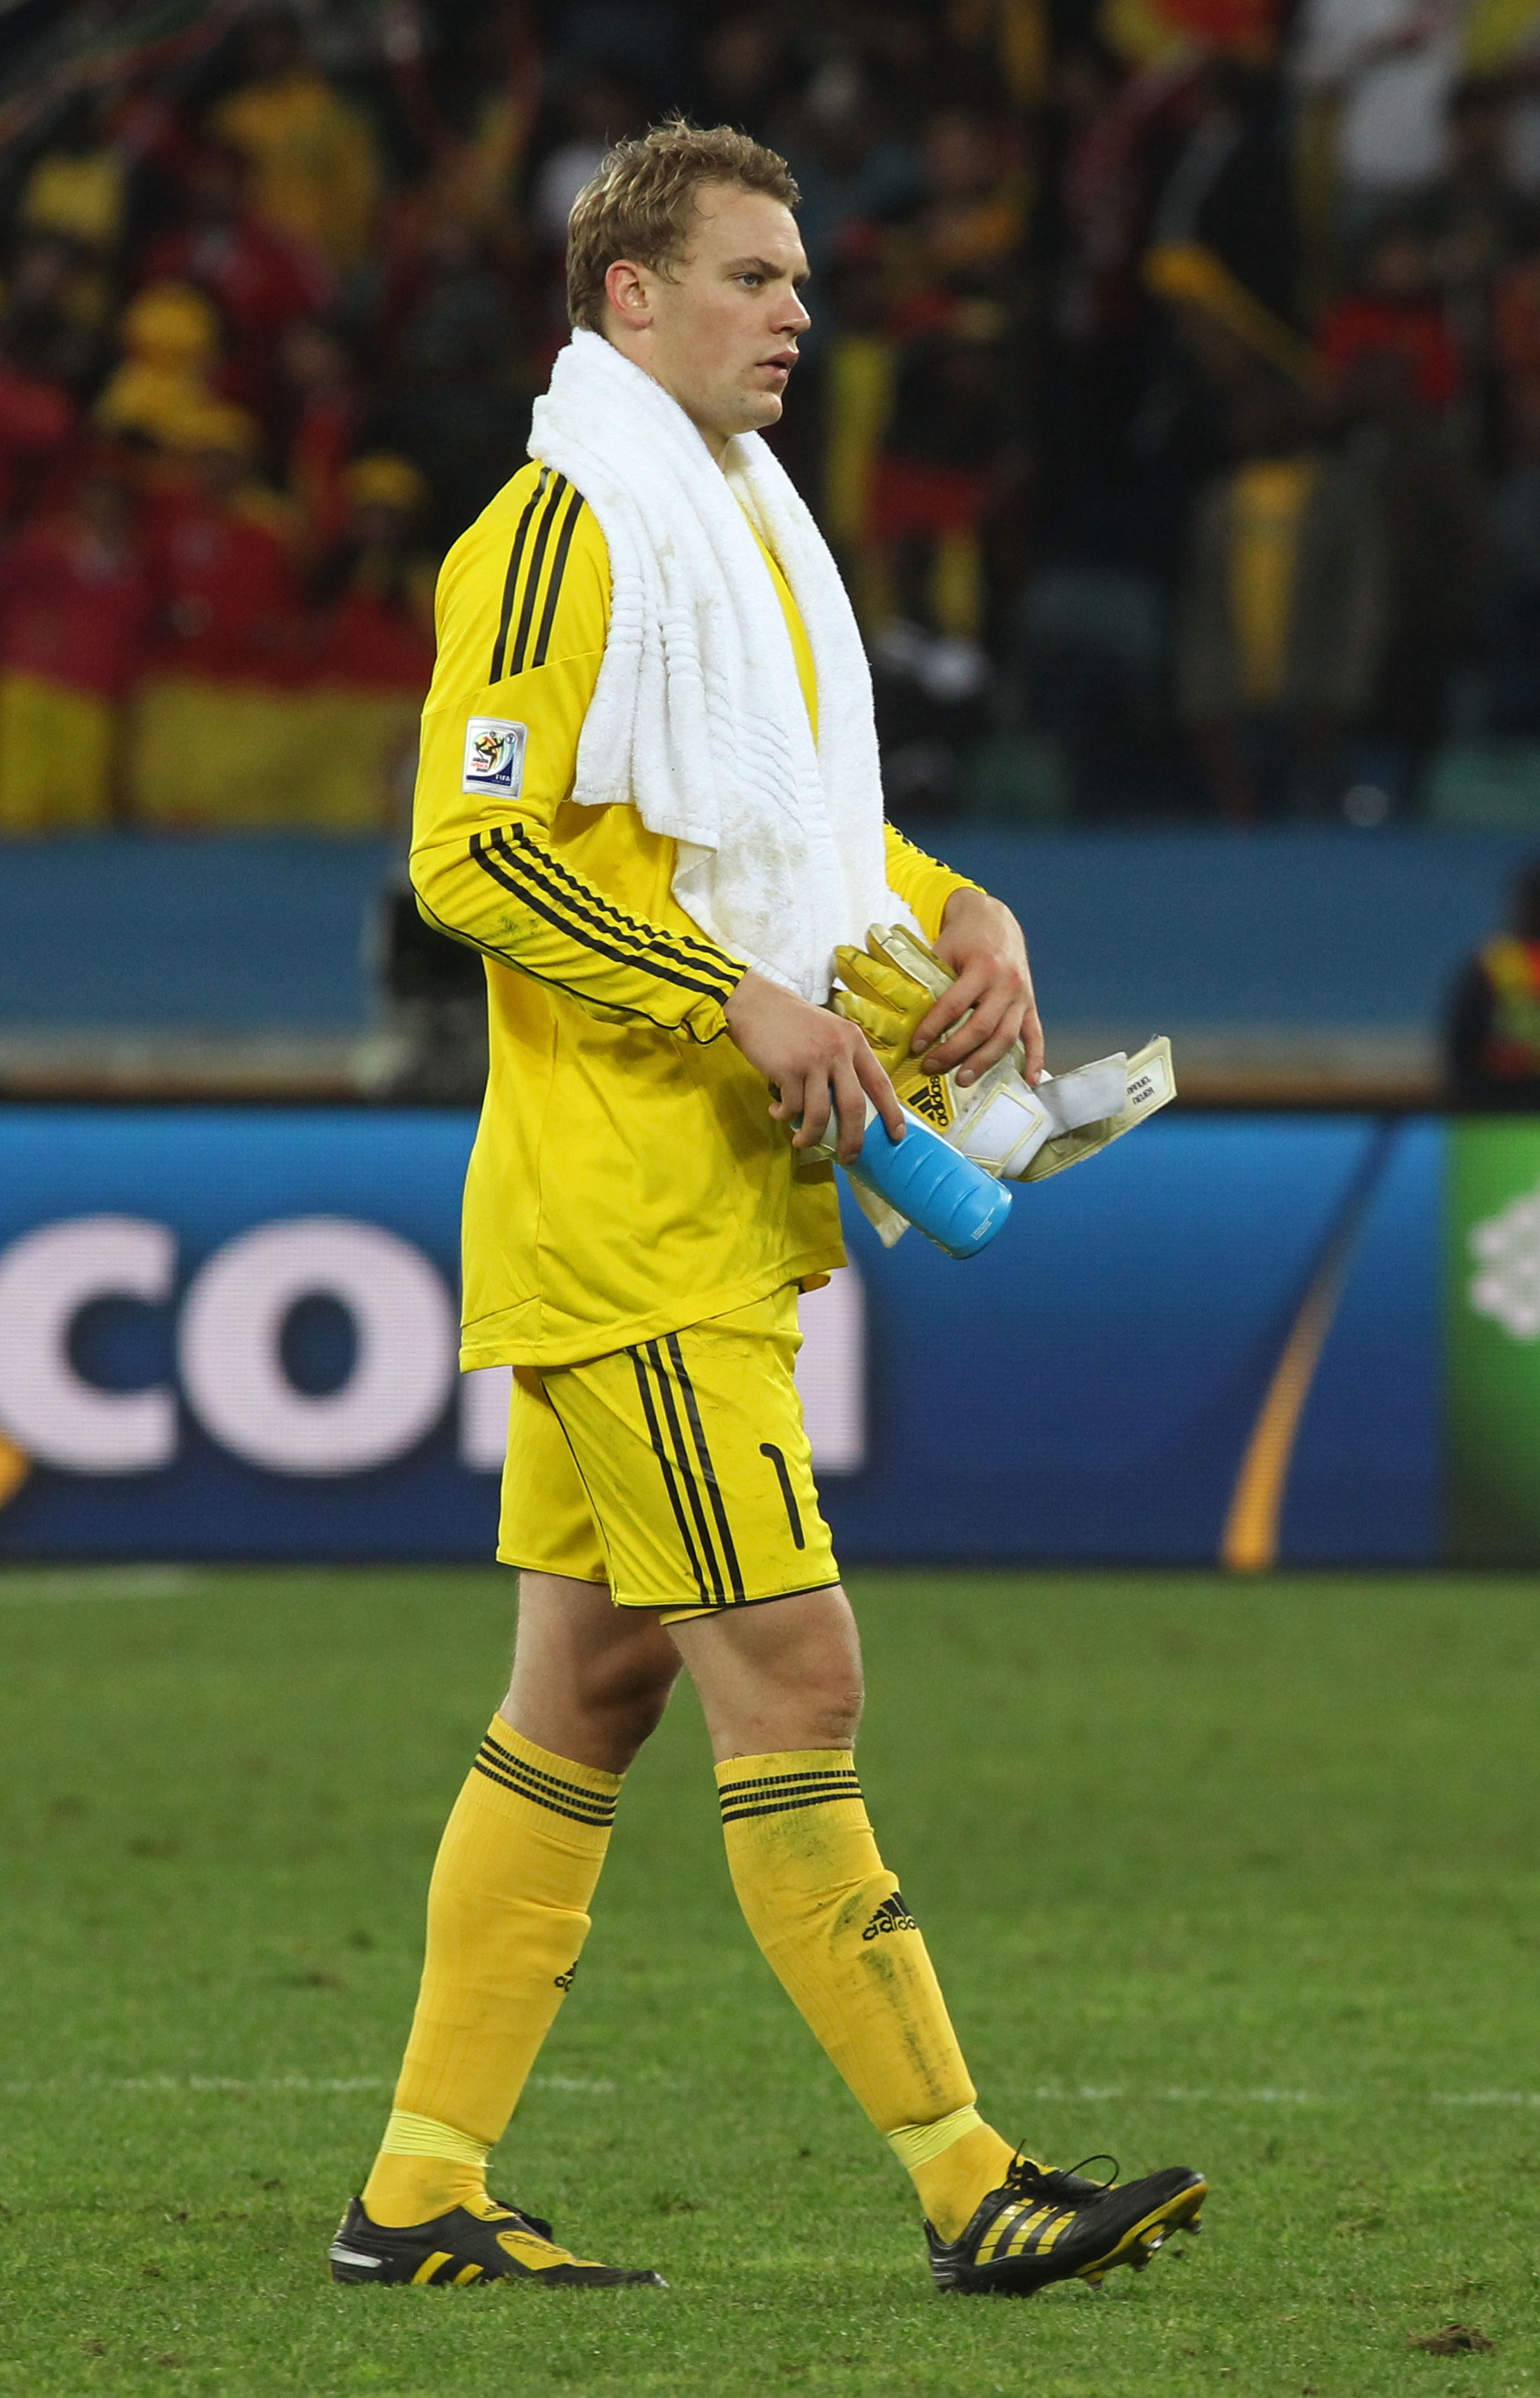 DURBAN, SOUTH AFRICA - JULY 07:  Dejected Dejected Manuel Neuer of Germany after being knocked out of the tournament during the 2010 FIFA World Cup South Africa Semi Final match between Germany and Spain at Durban Stadium on July 7, 2010 in Durban, South